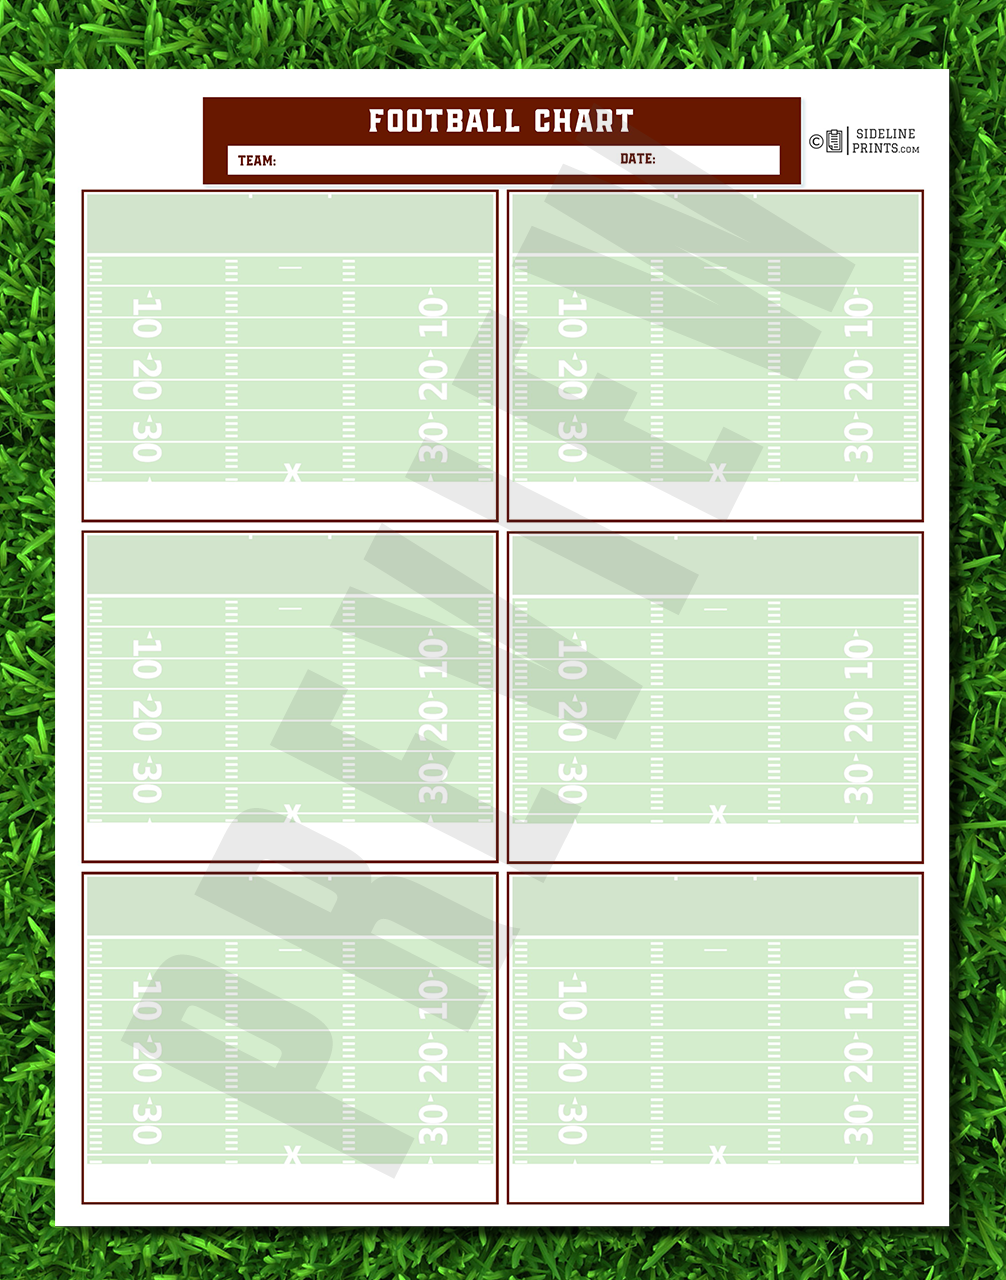 Play Chart x6 Template